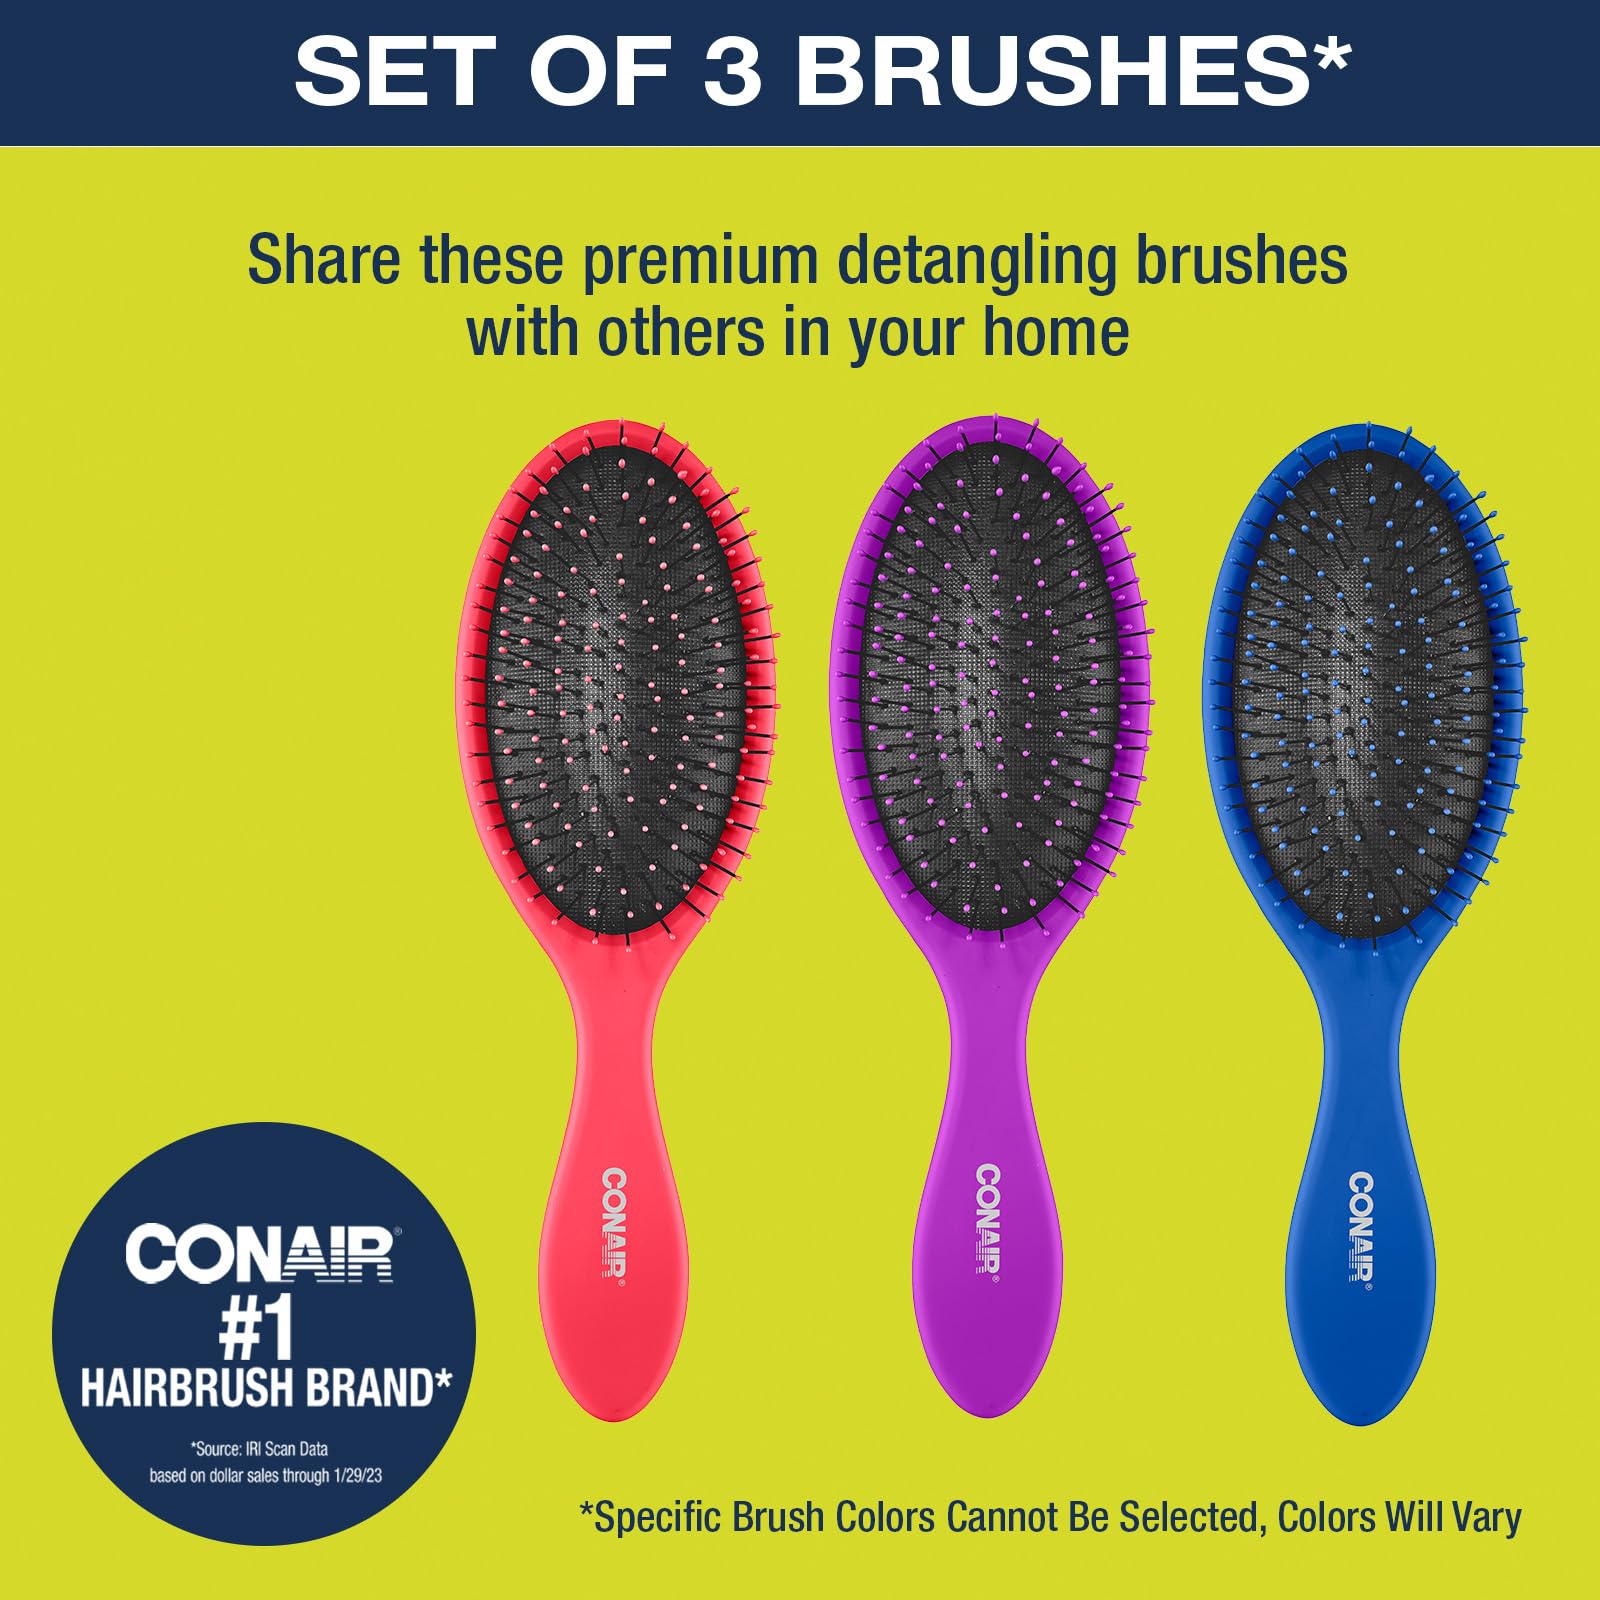 Conair Gently Detangle Hair Brush, Dry and Wet Hairbrush with Flexible Bristles, Color May Vary, 3 Count